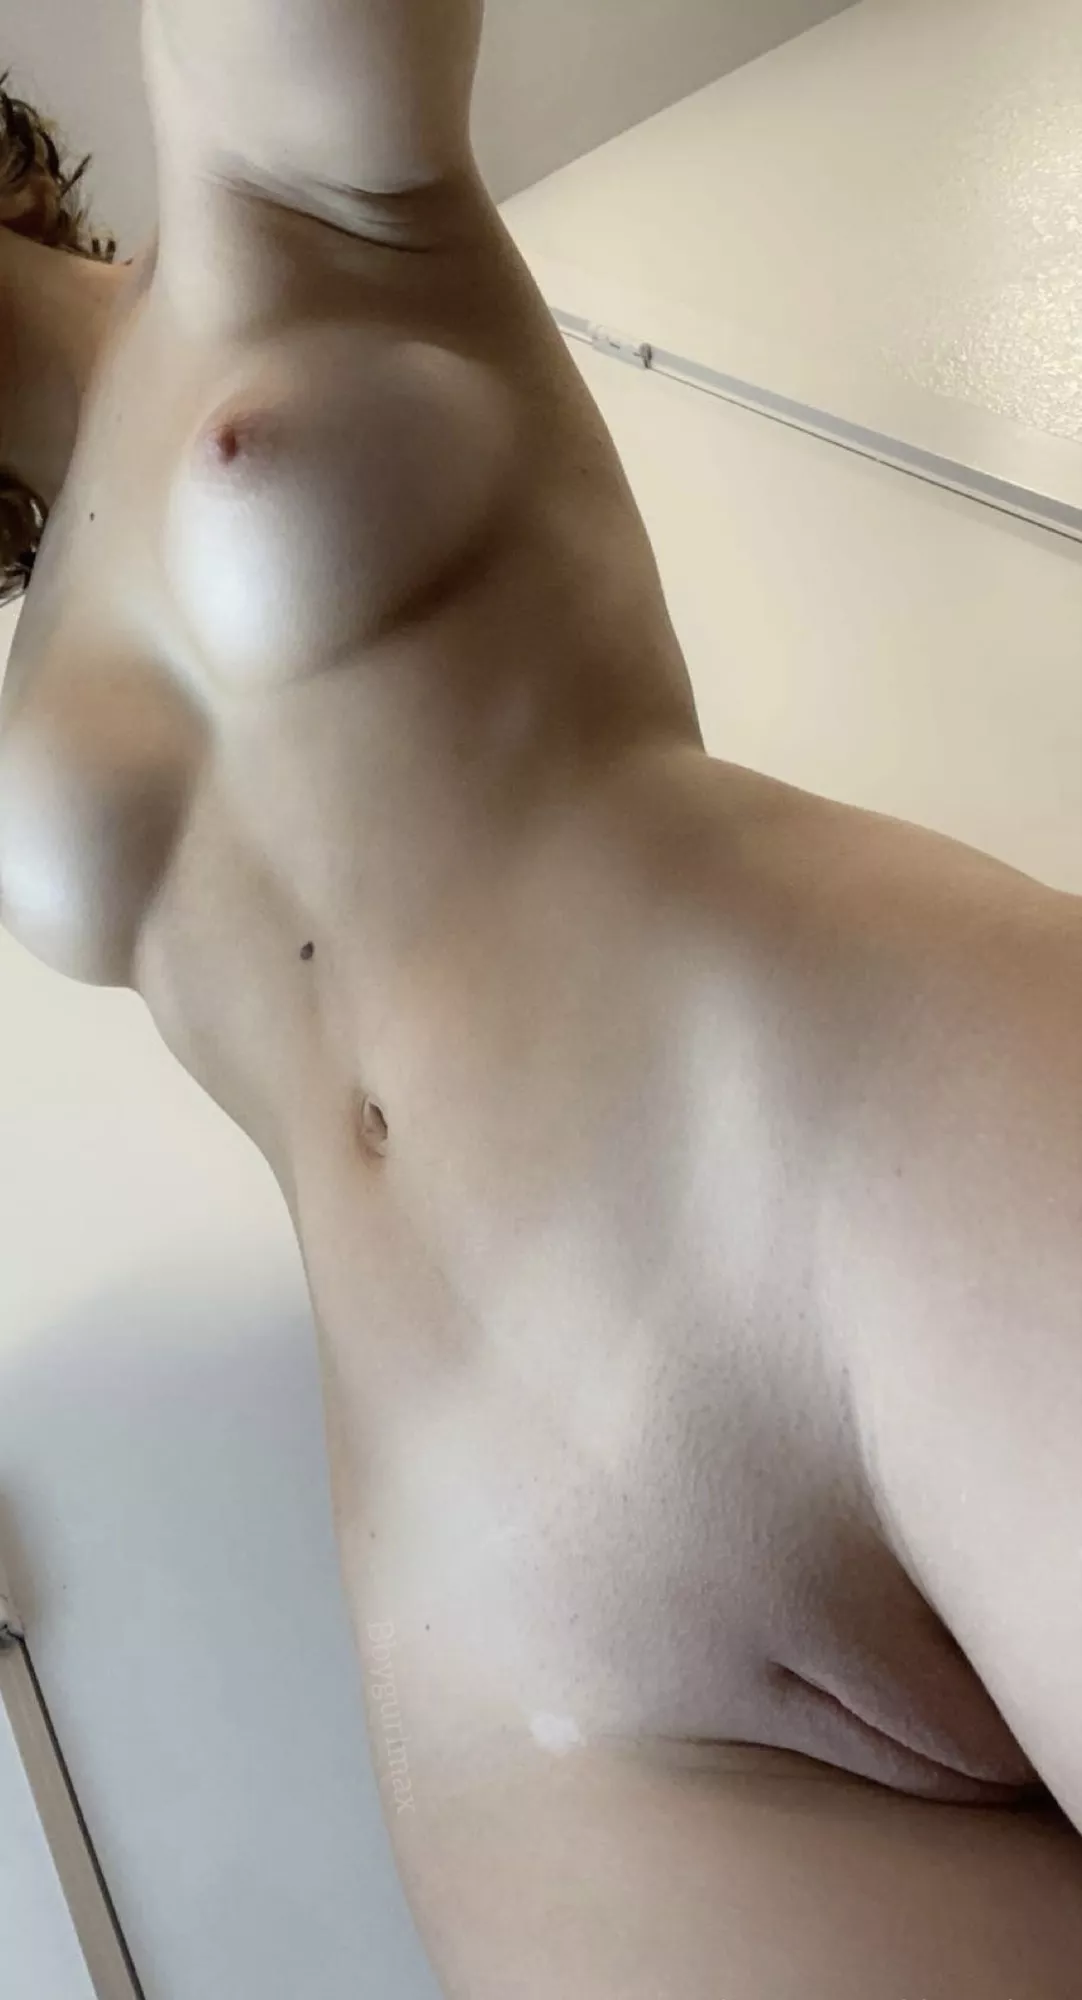 Shaved teen mound nudes by OakVGK